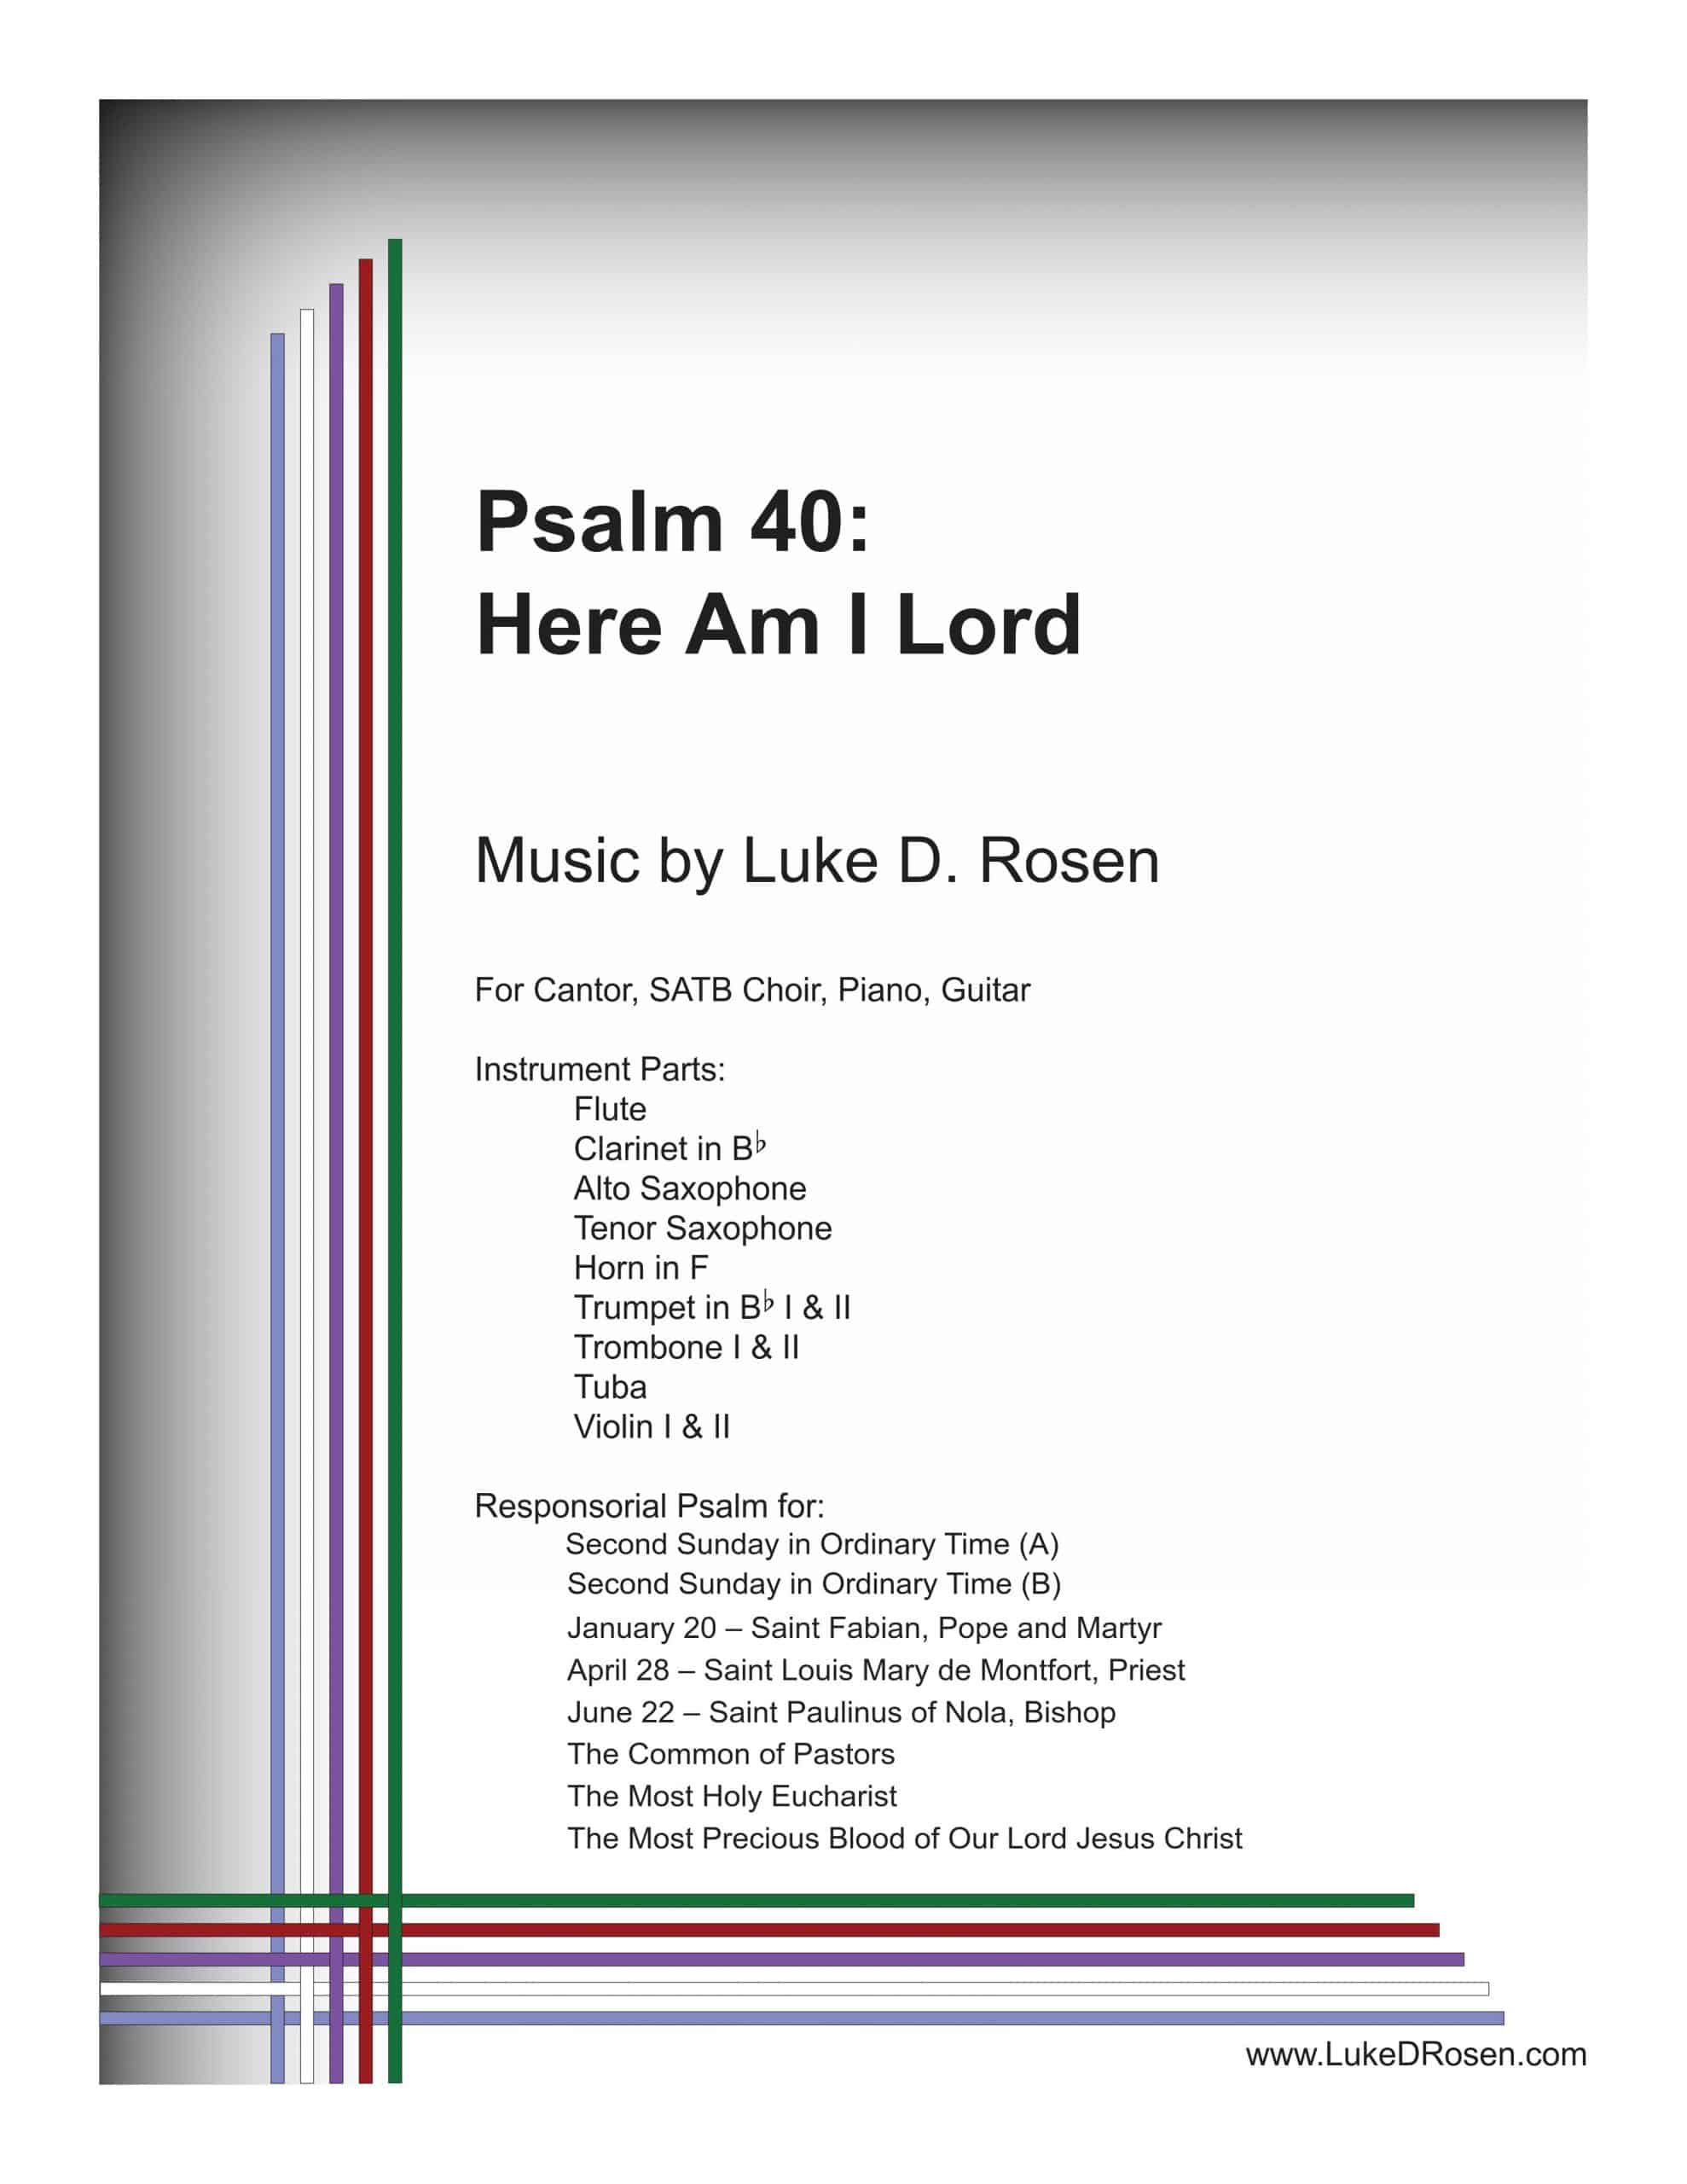 Psalm 40 – Here Am I, Lord (Rosen)